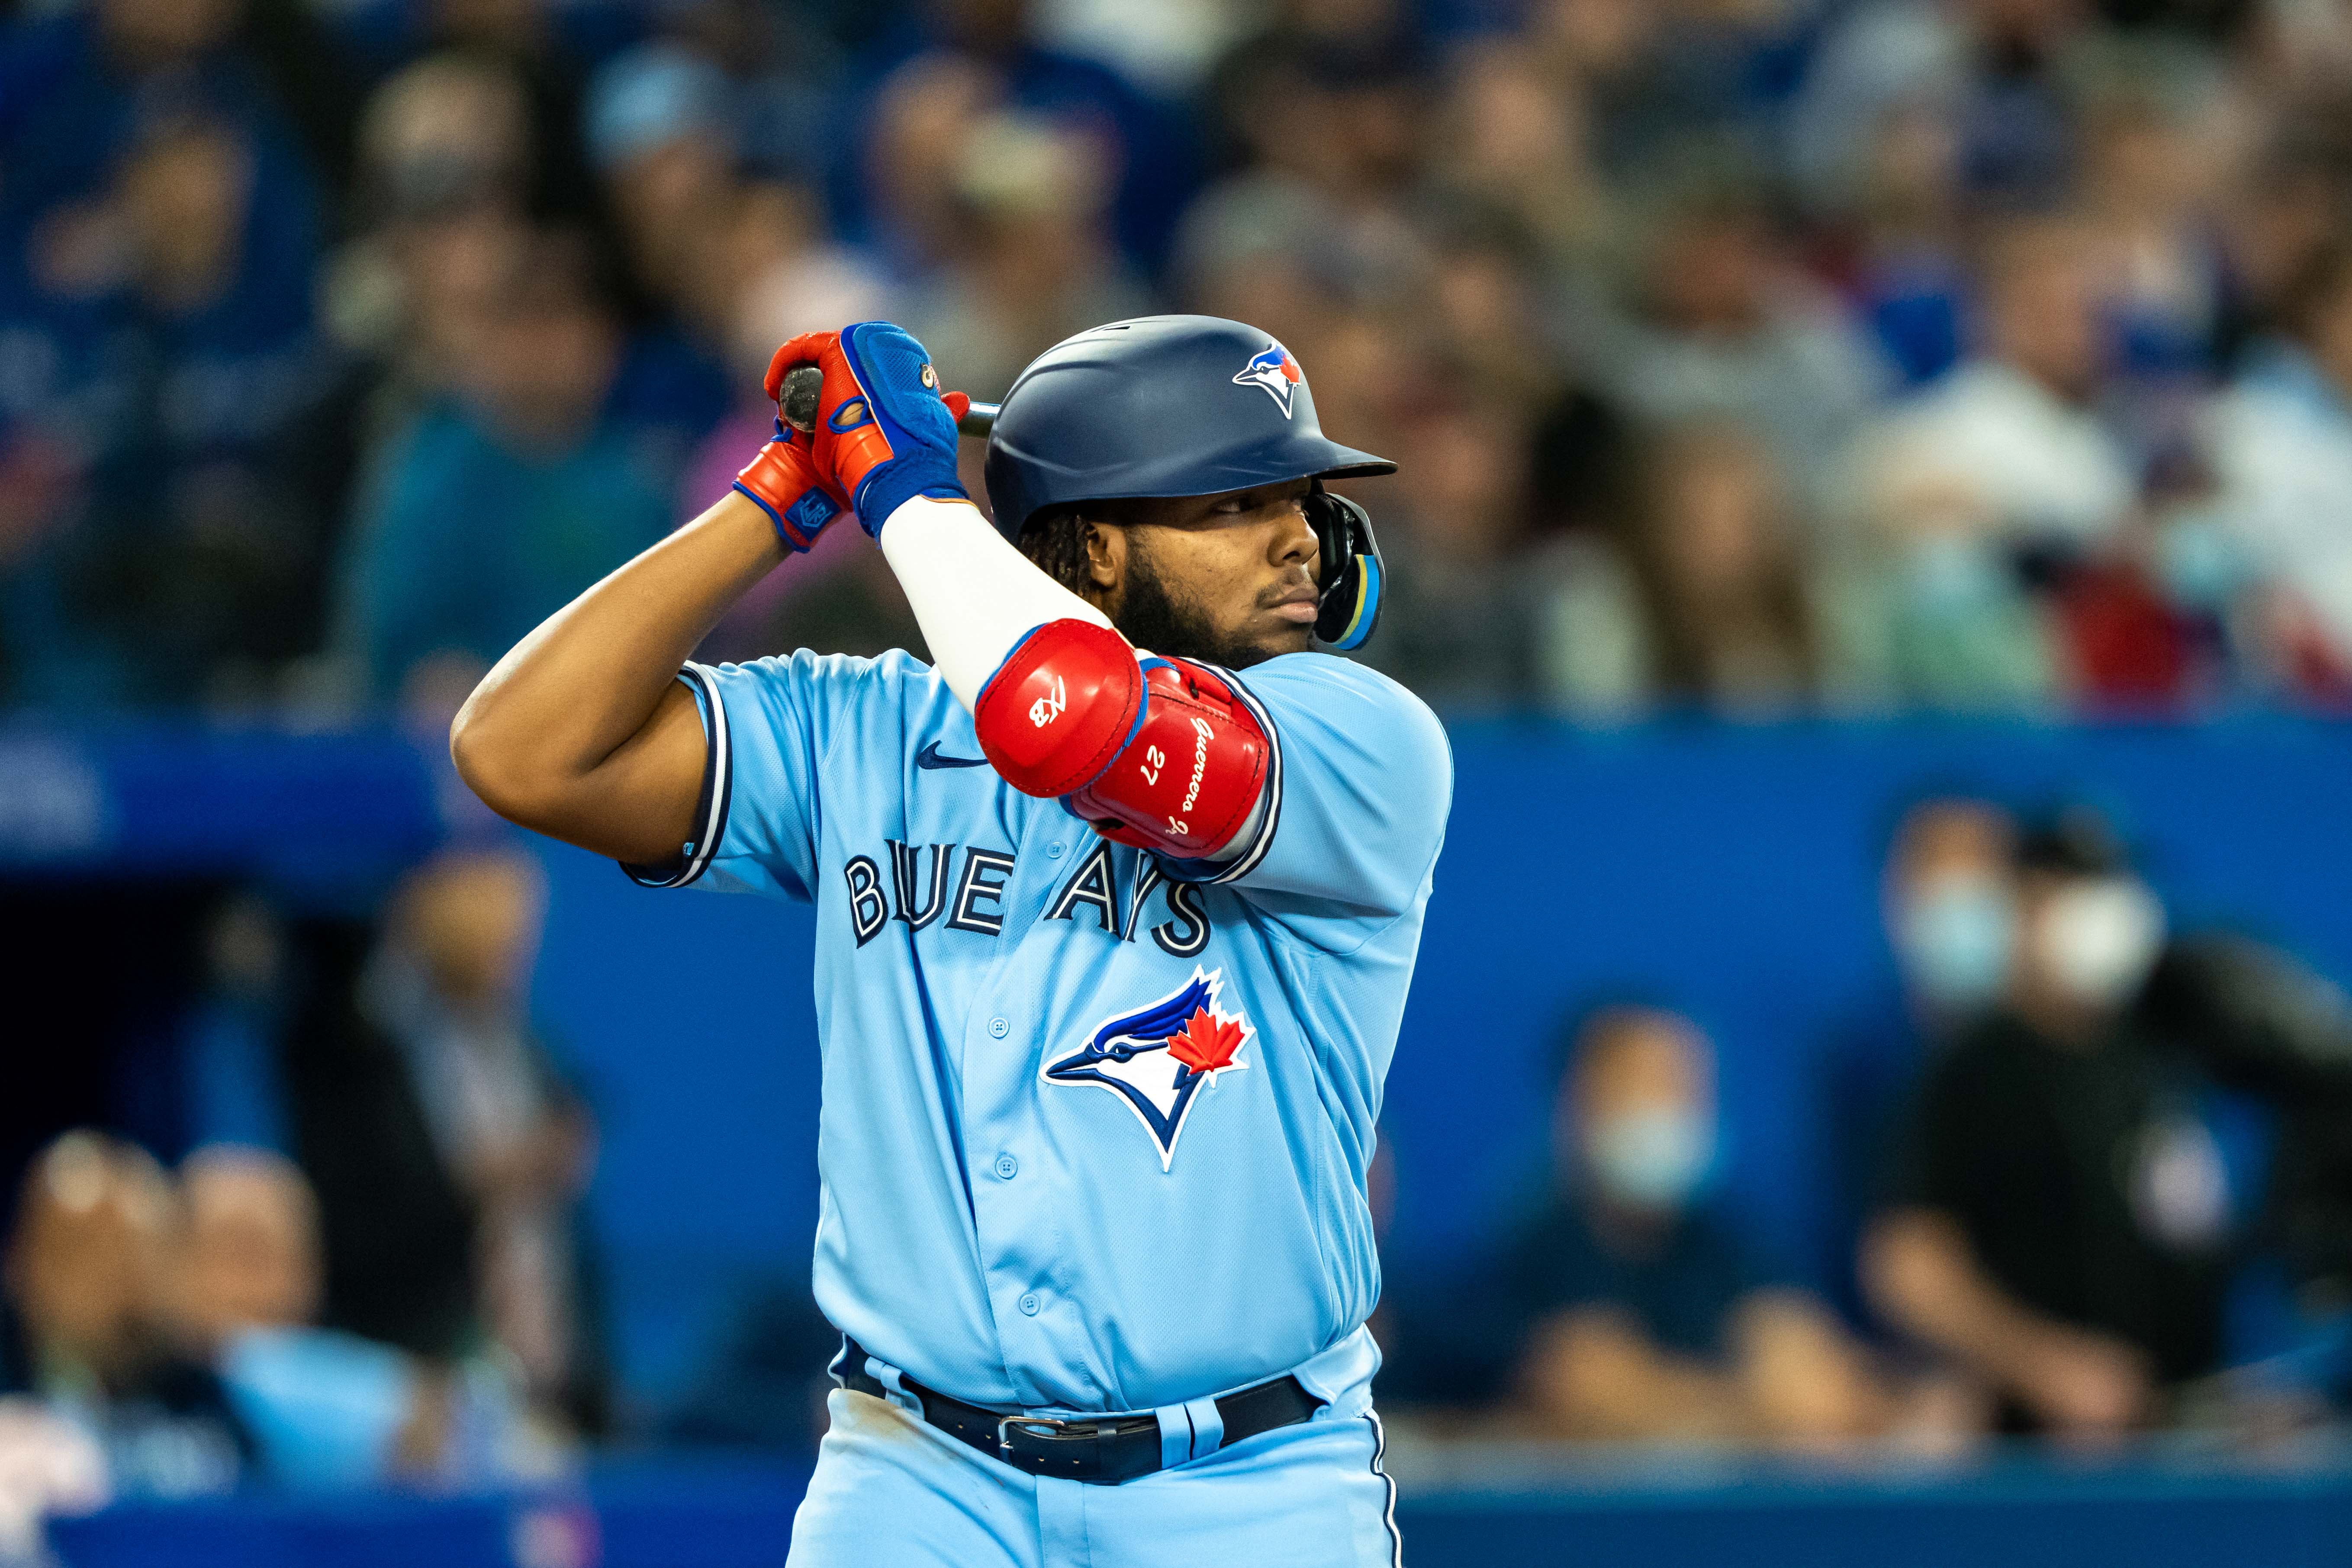 Get ready for your 2023 fantasy baseball draft with complete position